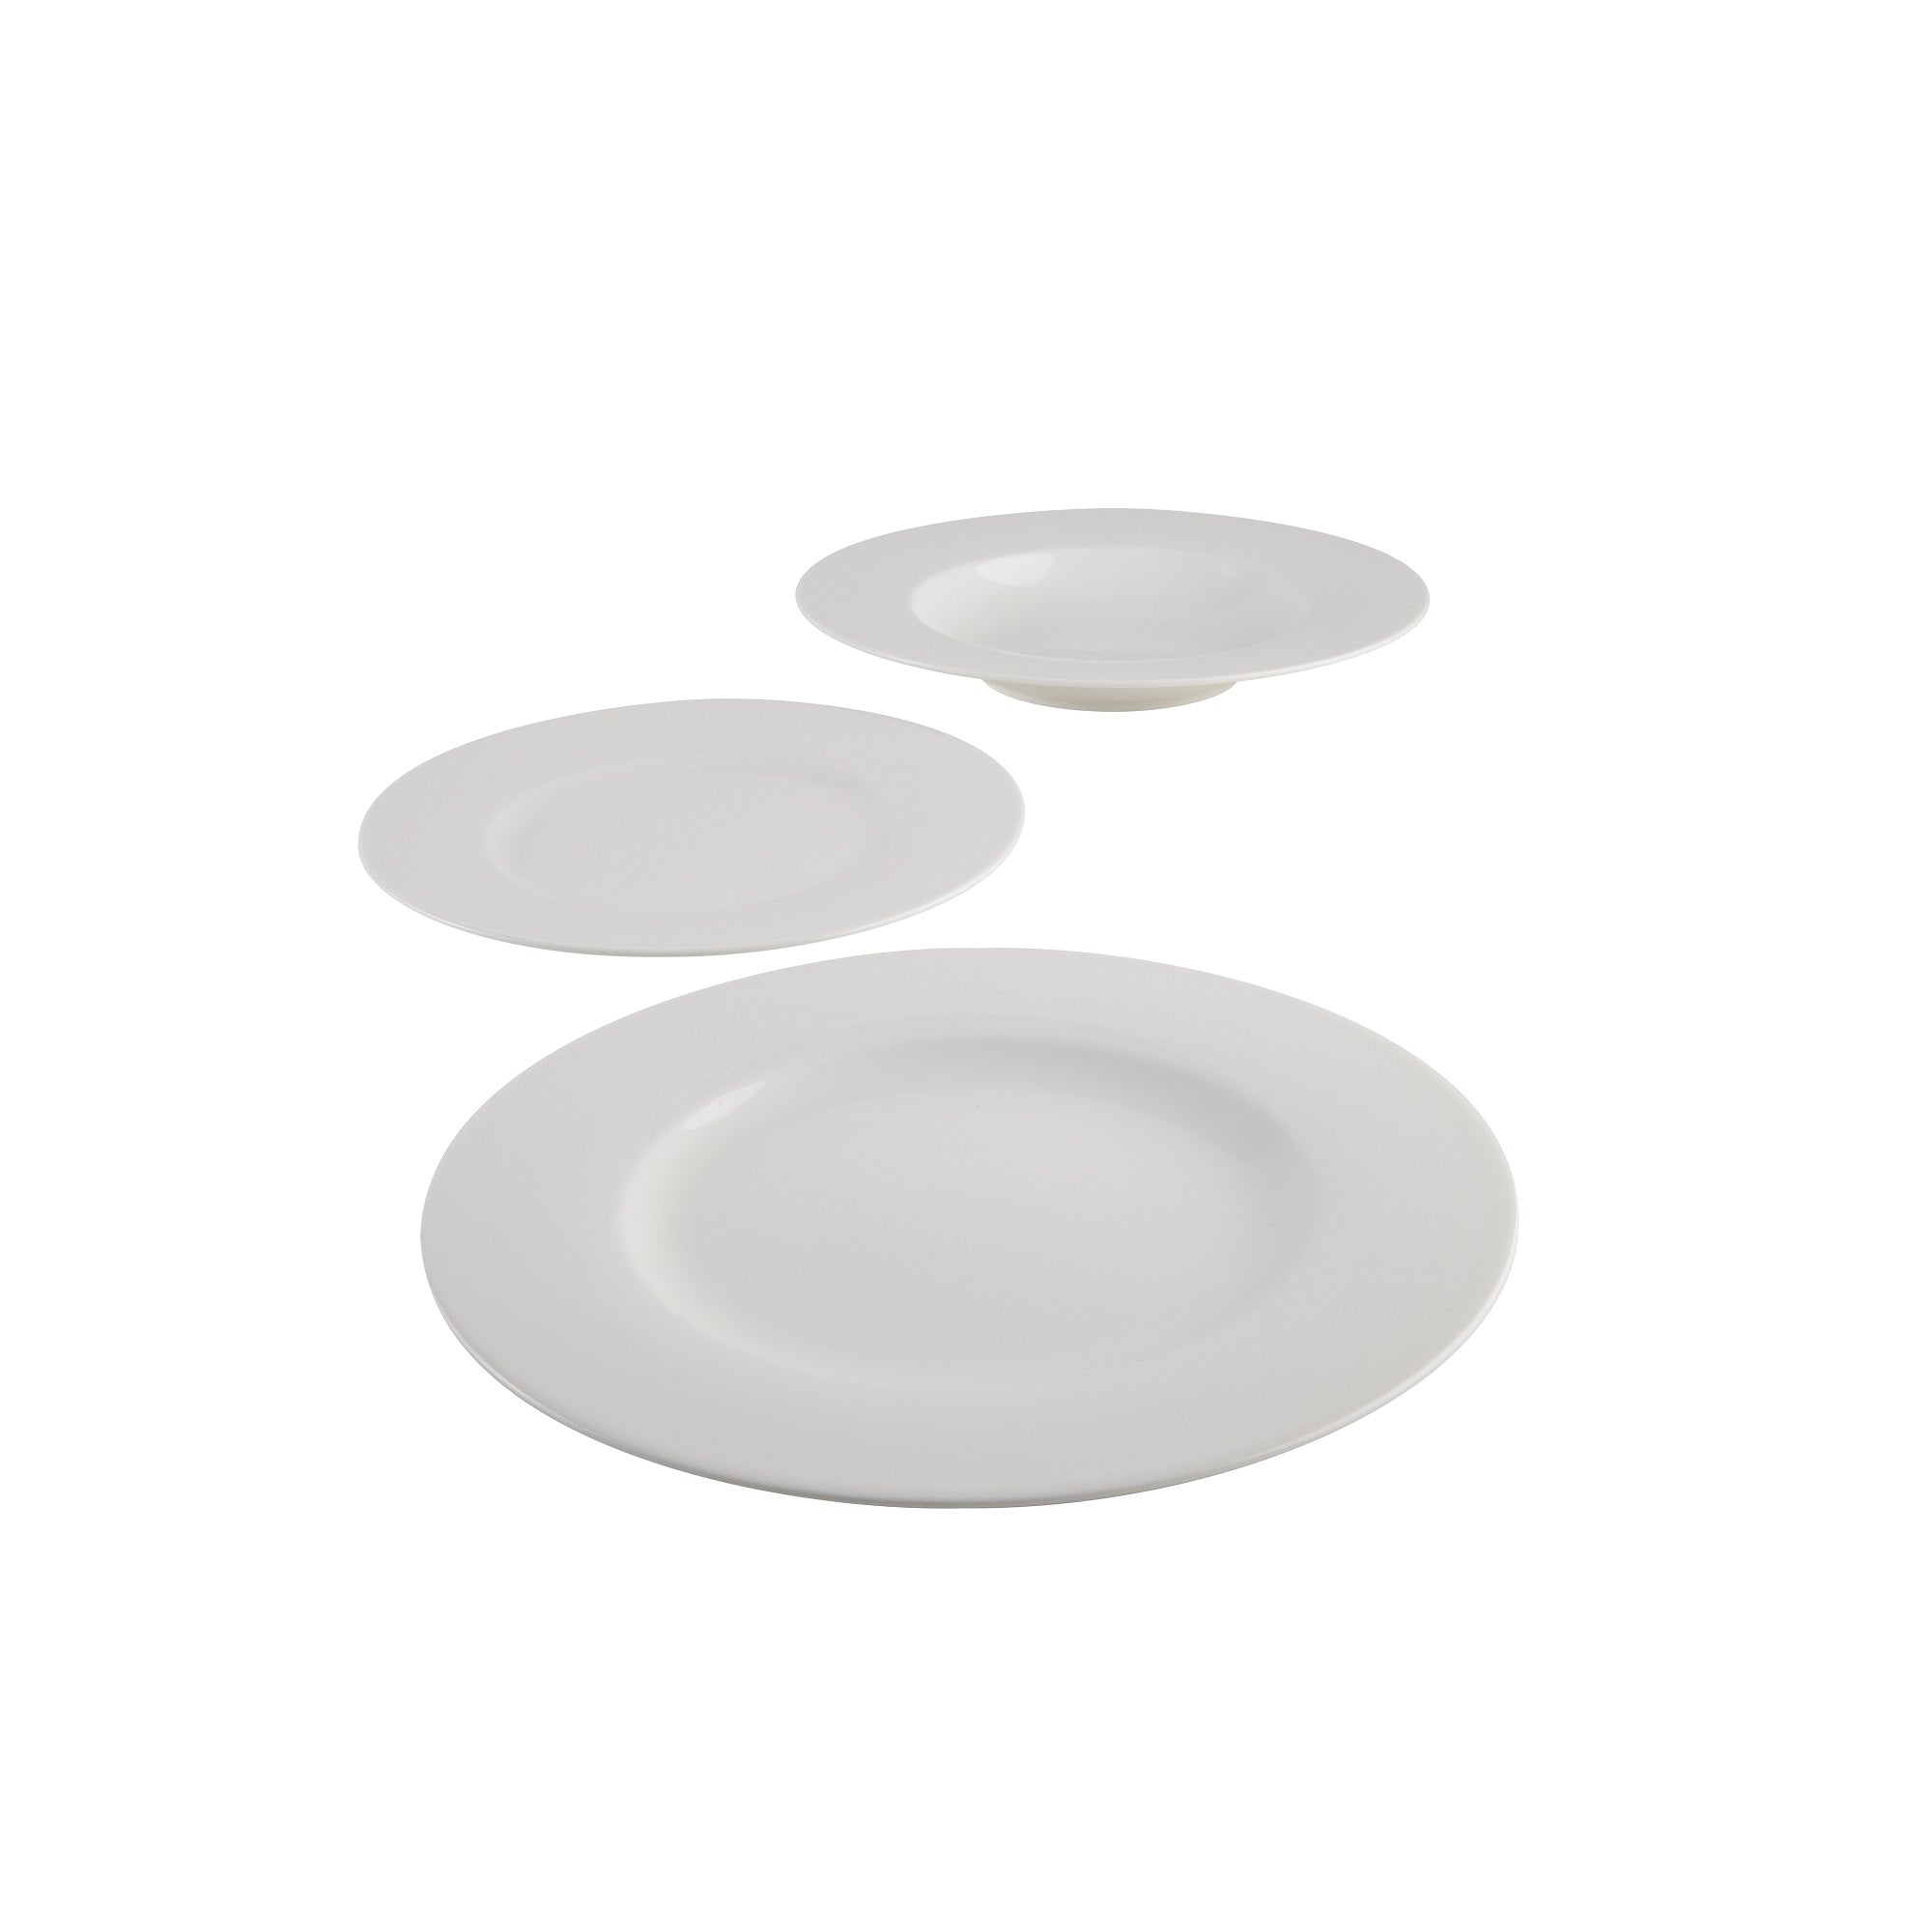 Likes. By Villeroy &amp; Boch Basic White 12-piece set for 4 people, consisting of: 4 dinner plates, 4 soup plates, 4 dessert plates